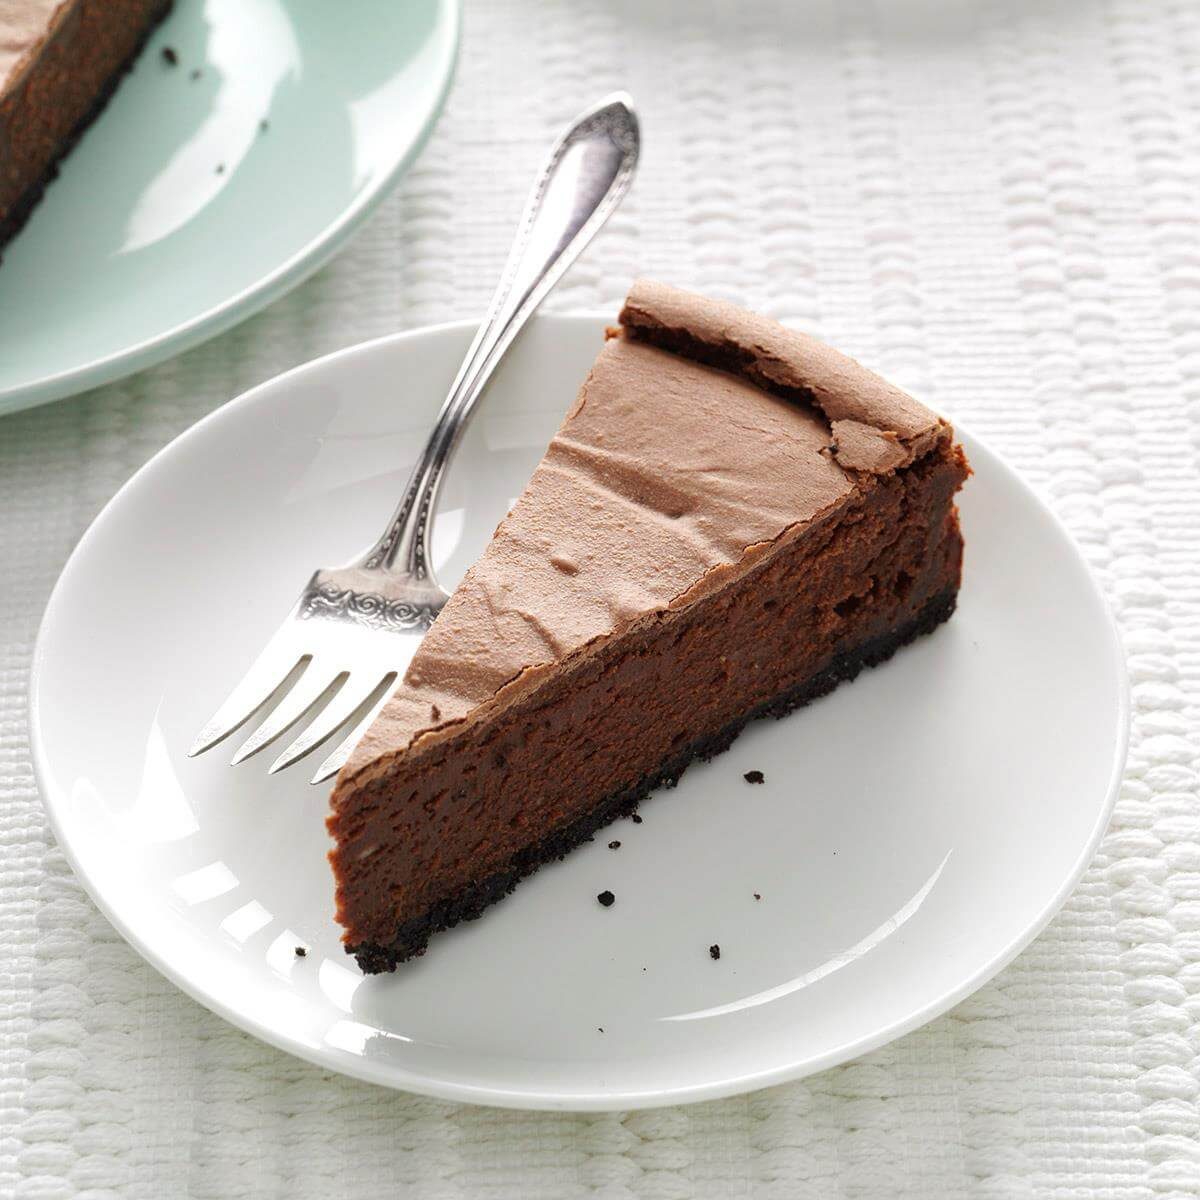 30 Chocolate Cheesecake Recipes That Are the Ultimate Indulgence